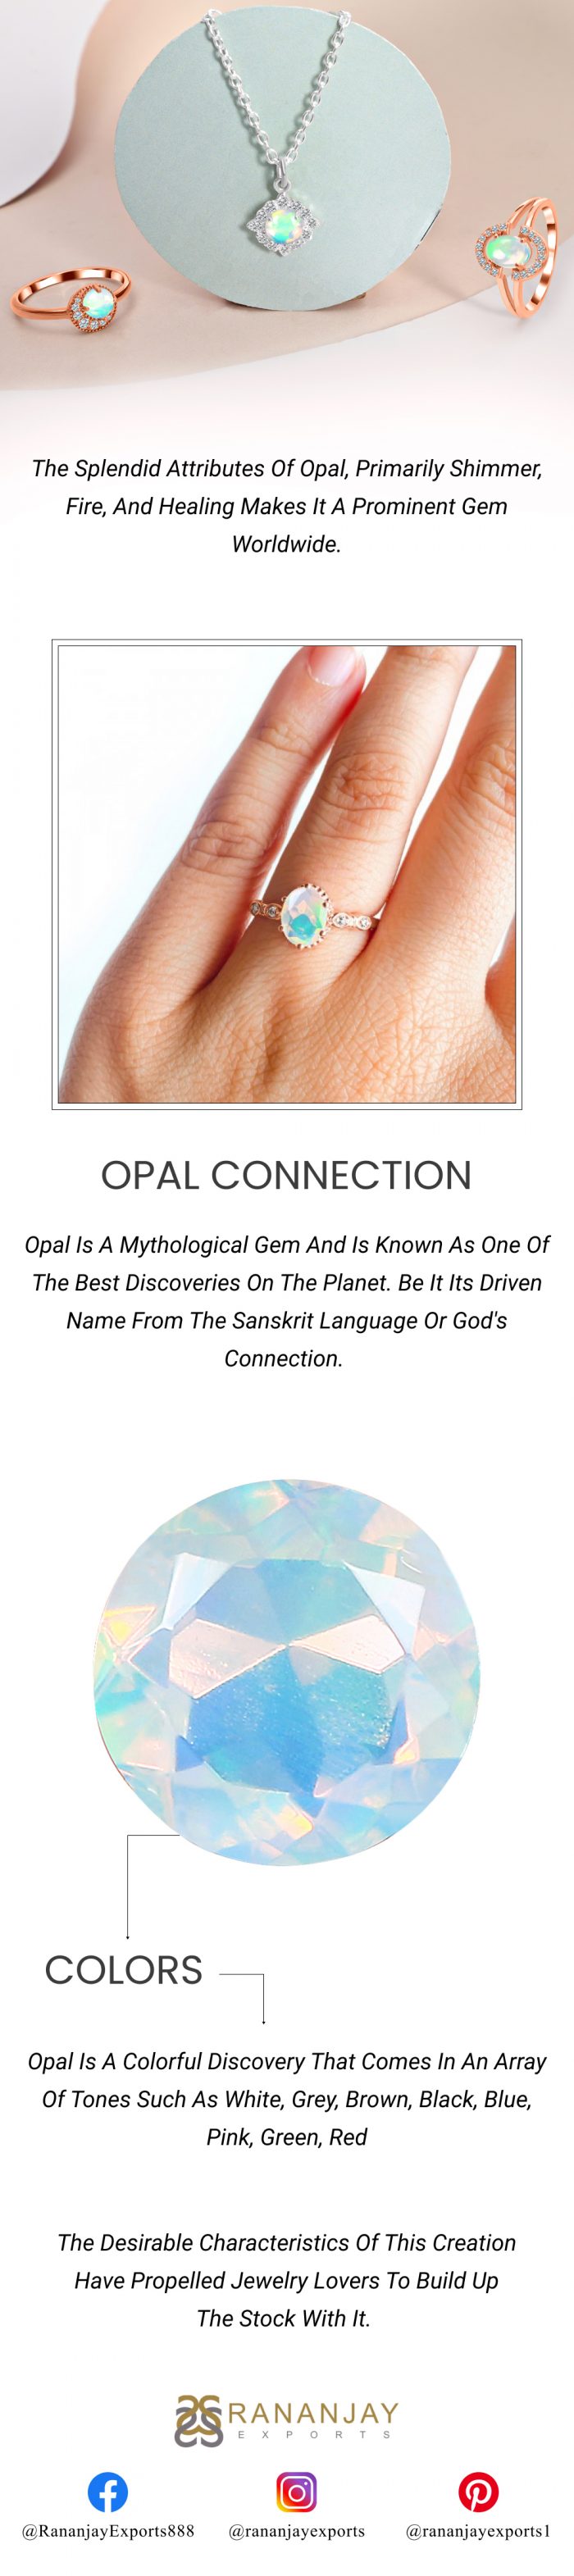 Tips For Shopping For Great Deals on Opal Jewelry Online